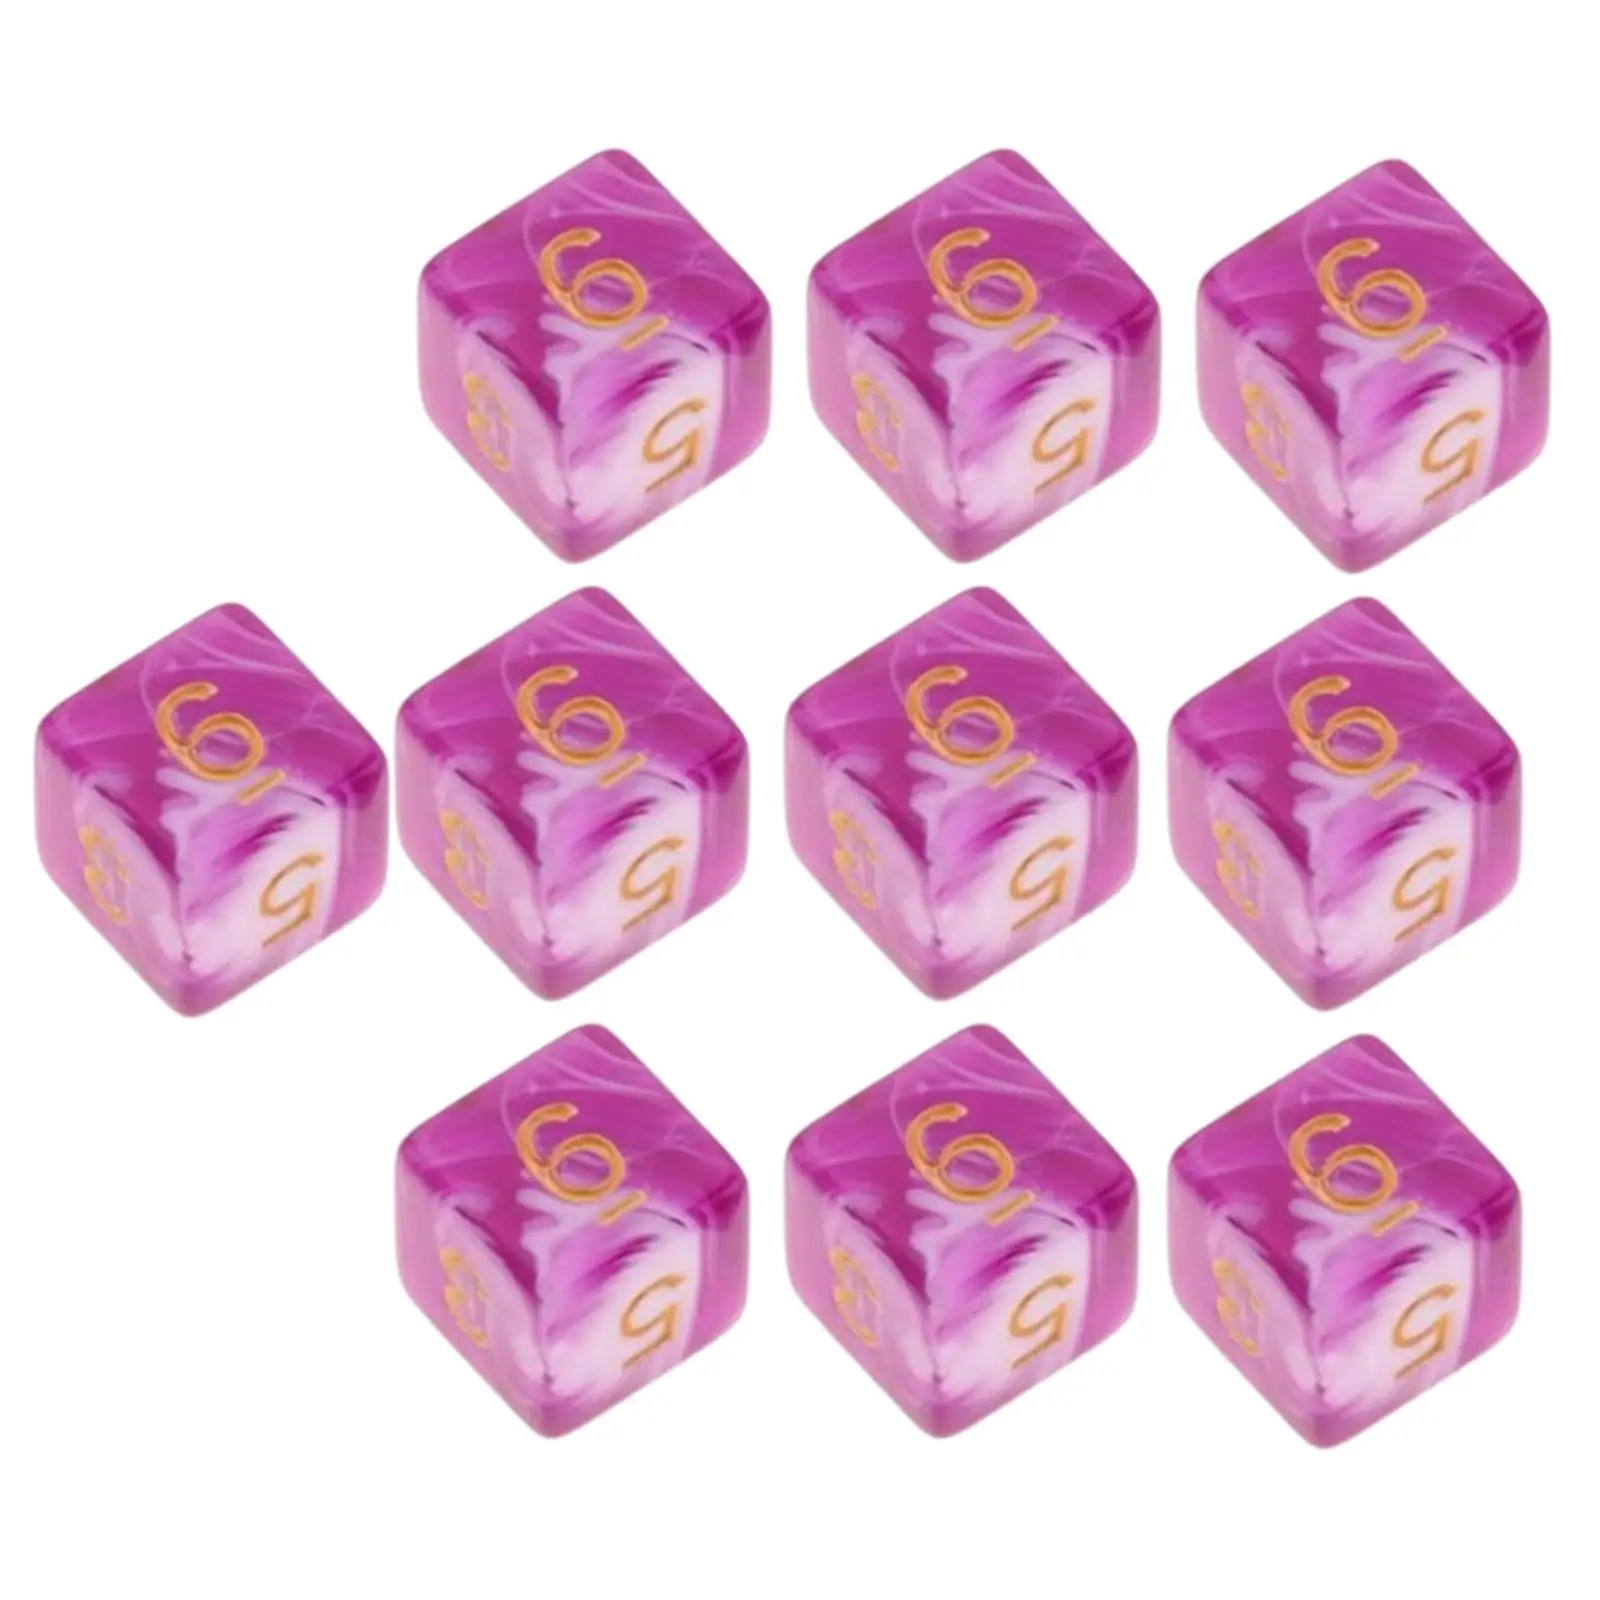 Acrylic D6 Dice Leisure Entertainment Toys Game Dice for Table Board Roll Playing Game